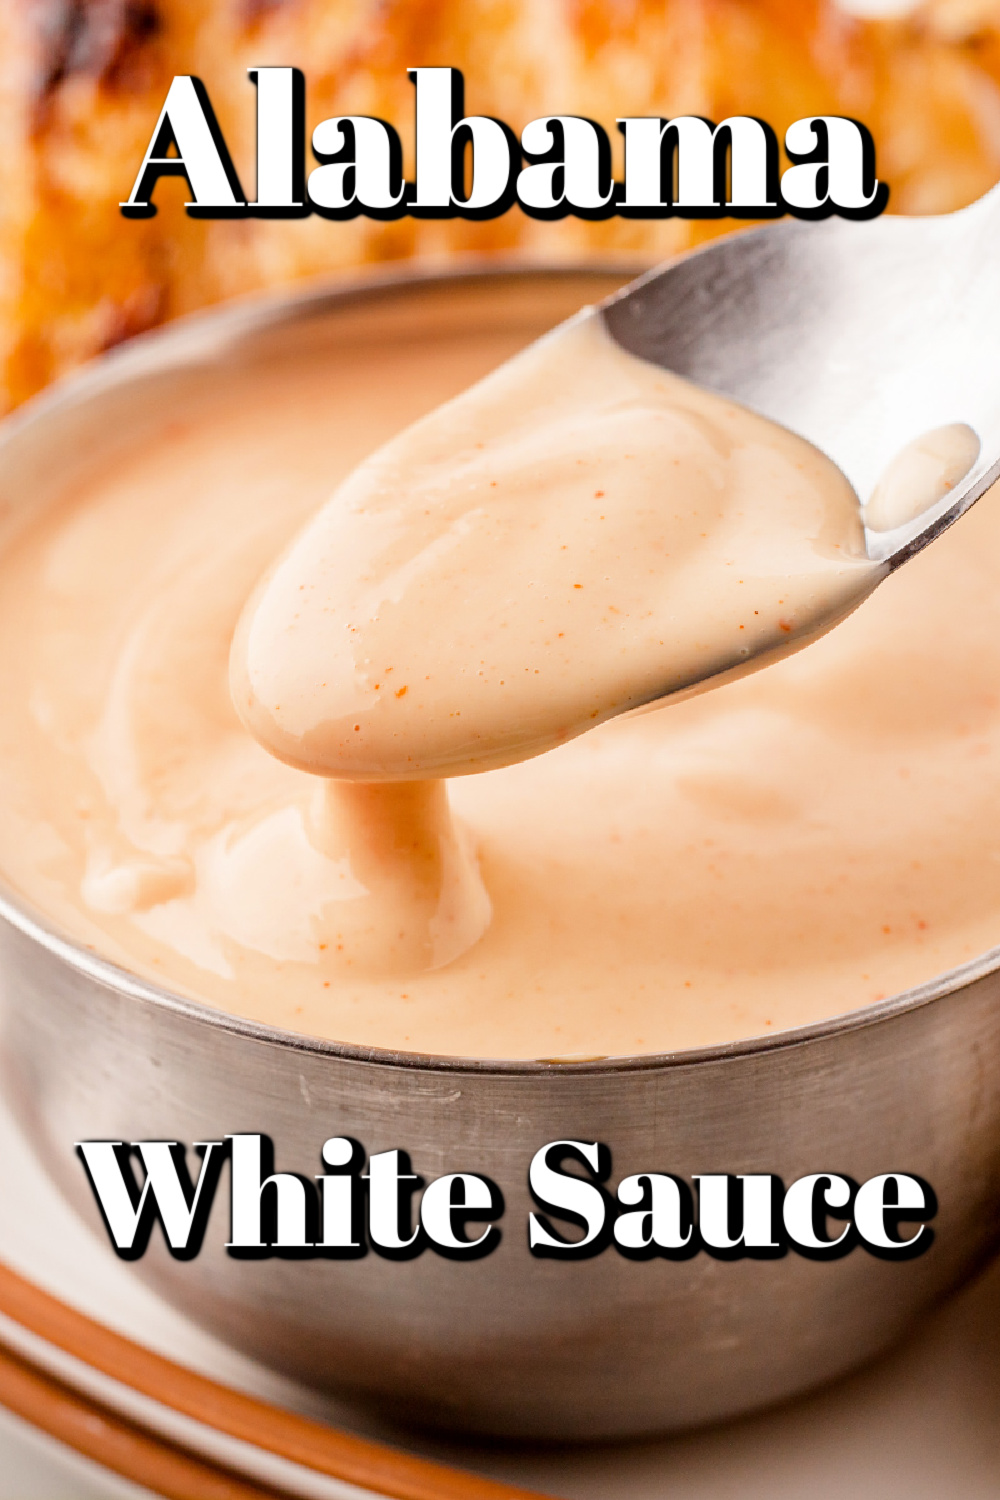 This Alabama White Sauce has a creamy flavor with just a little kick of tanginess. It's the perfect topper for chicken, pork, or anywhere you use regular mayonnaise!